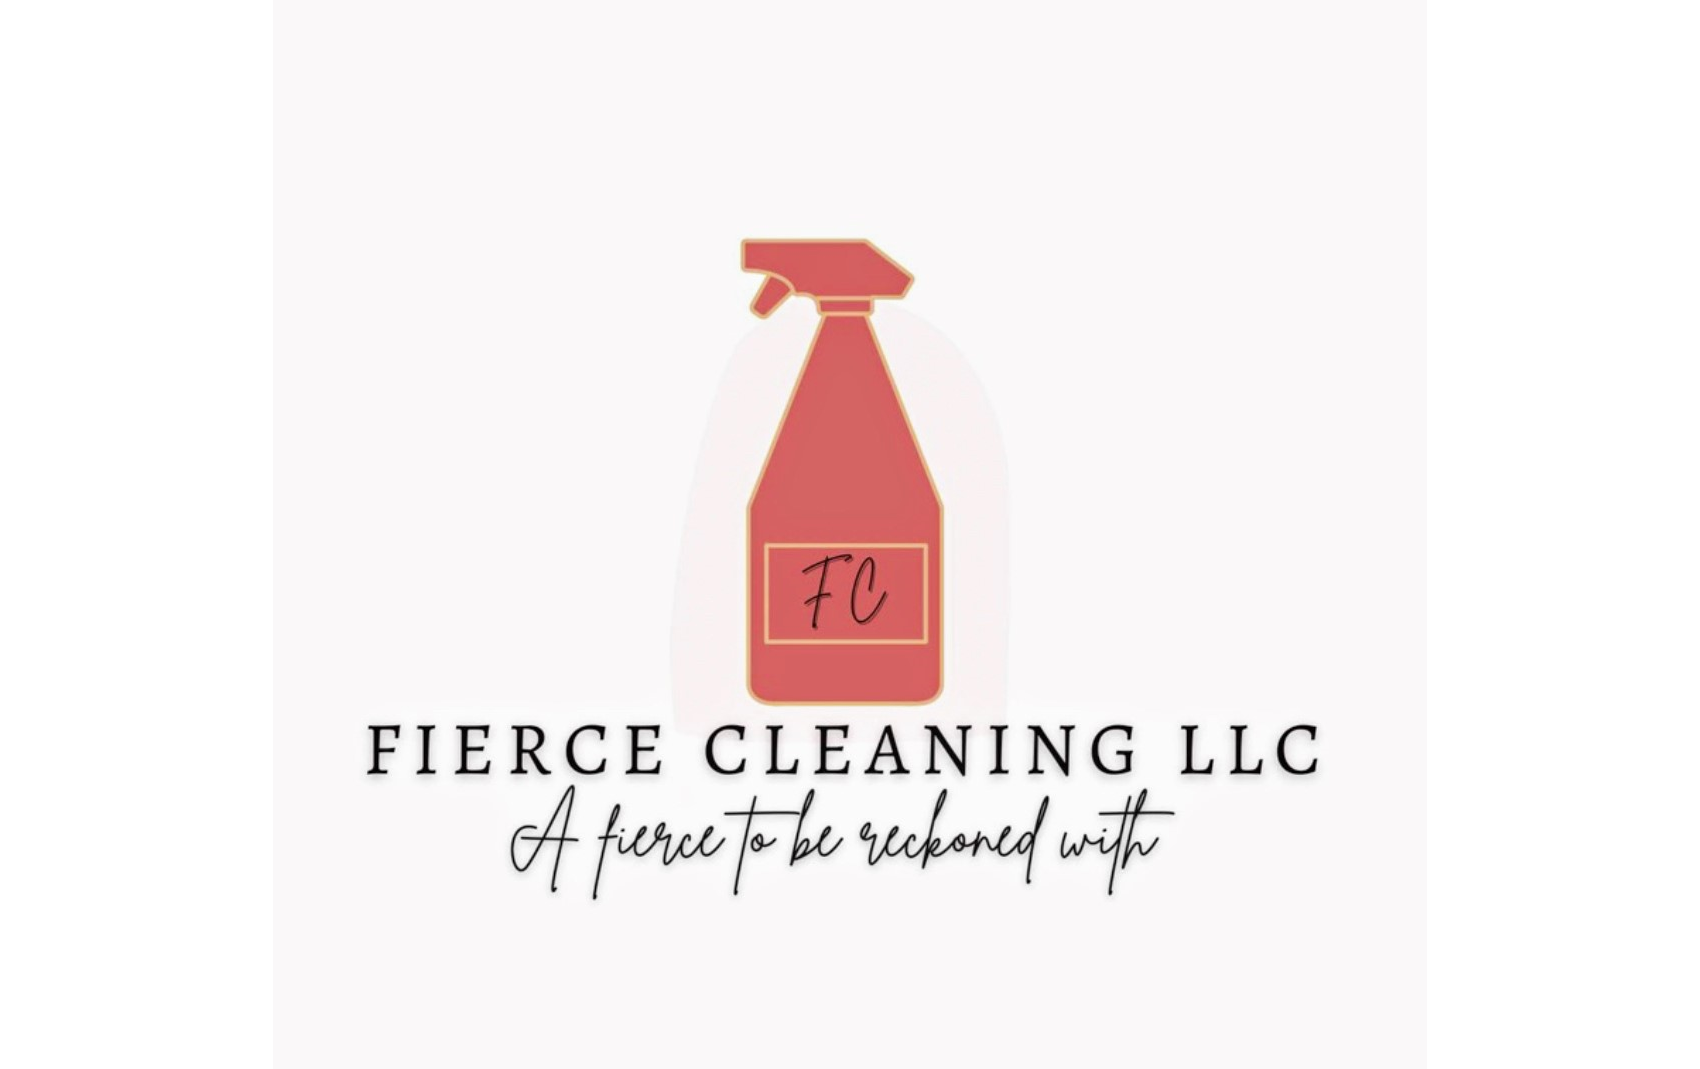 A Fierce To Be Reckoned With - Fierce Cleaning